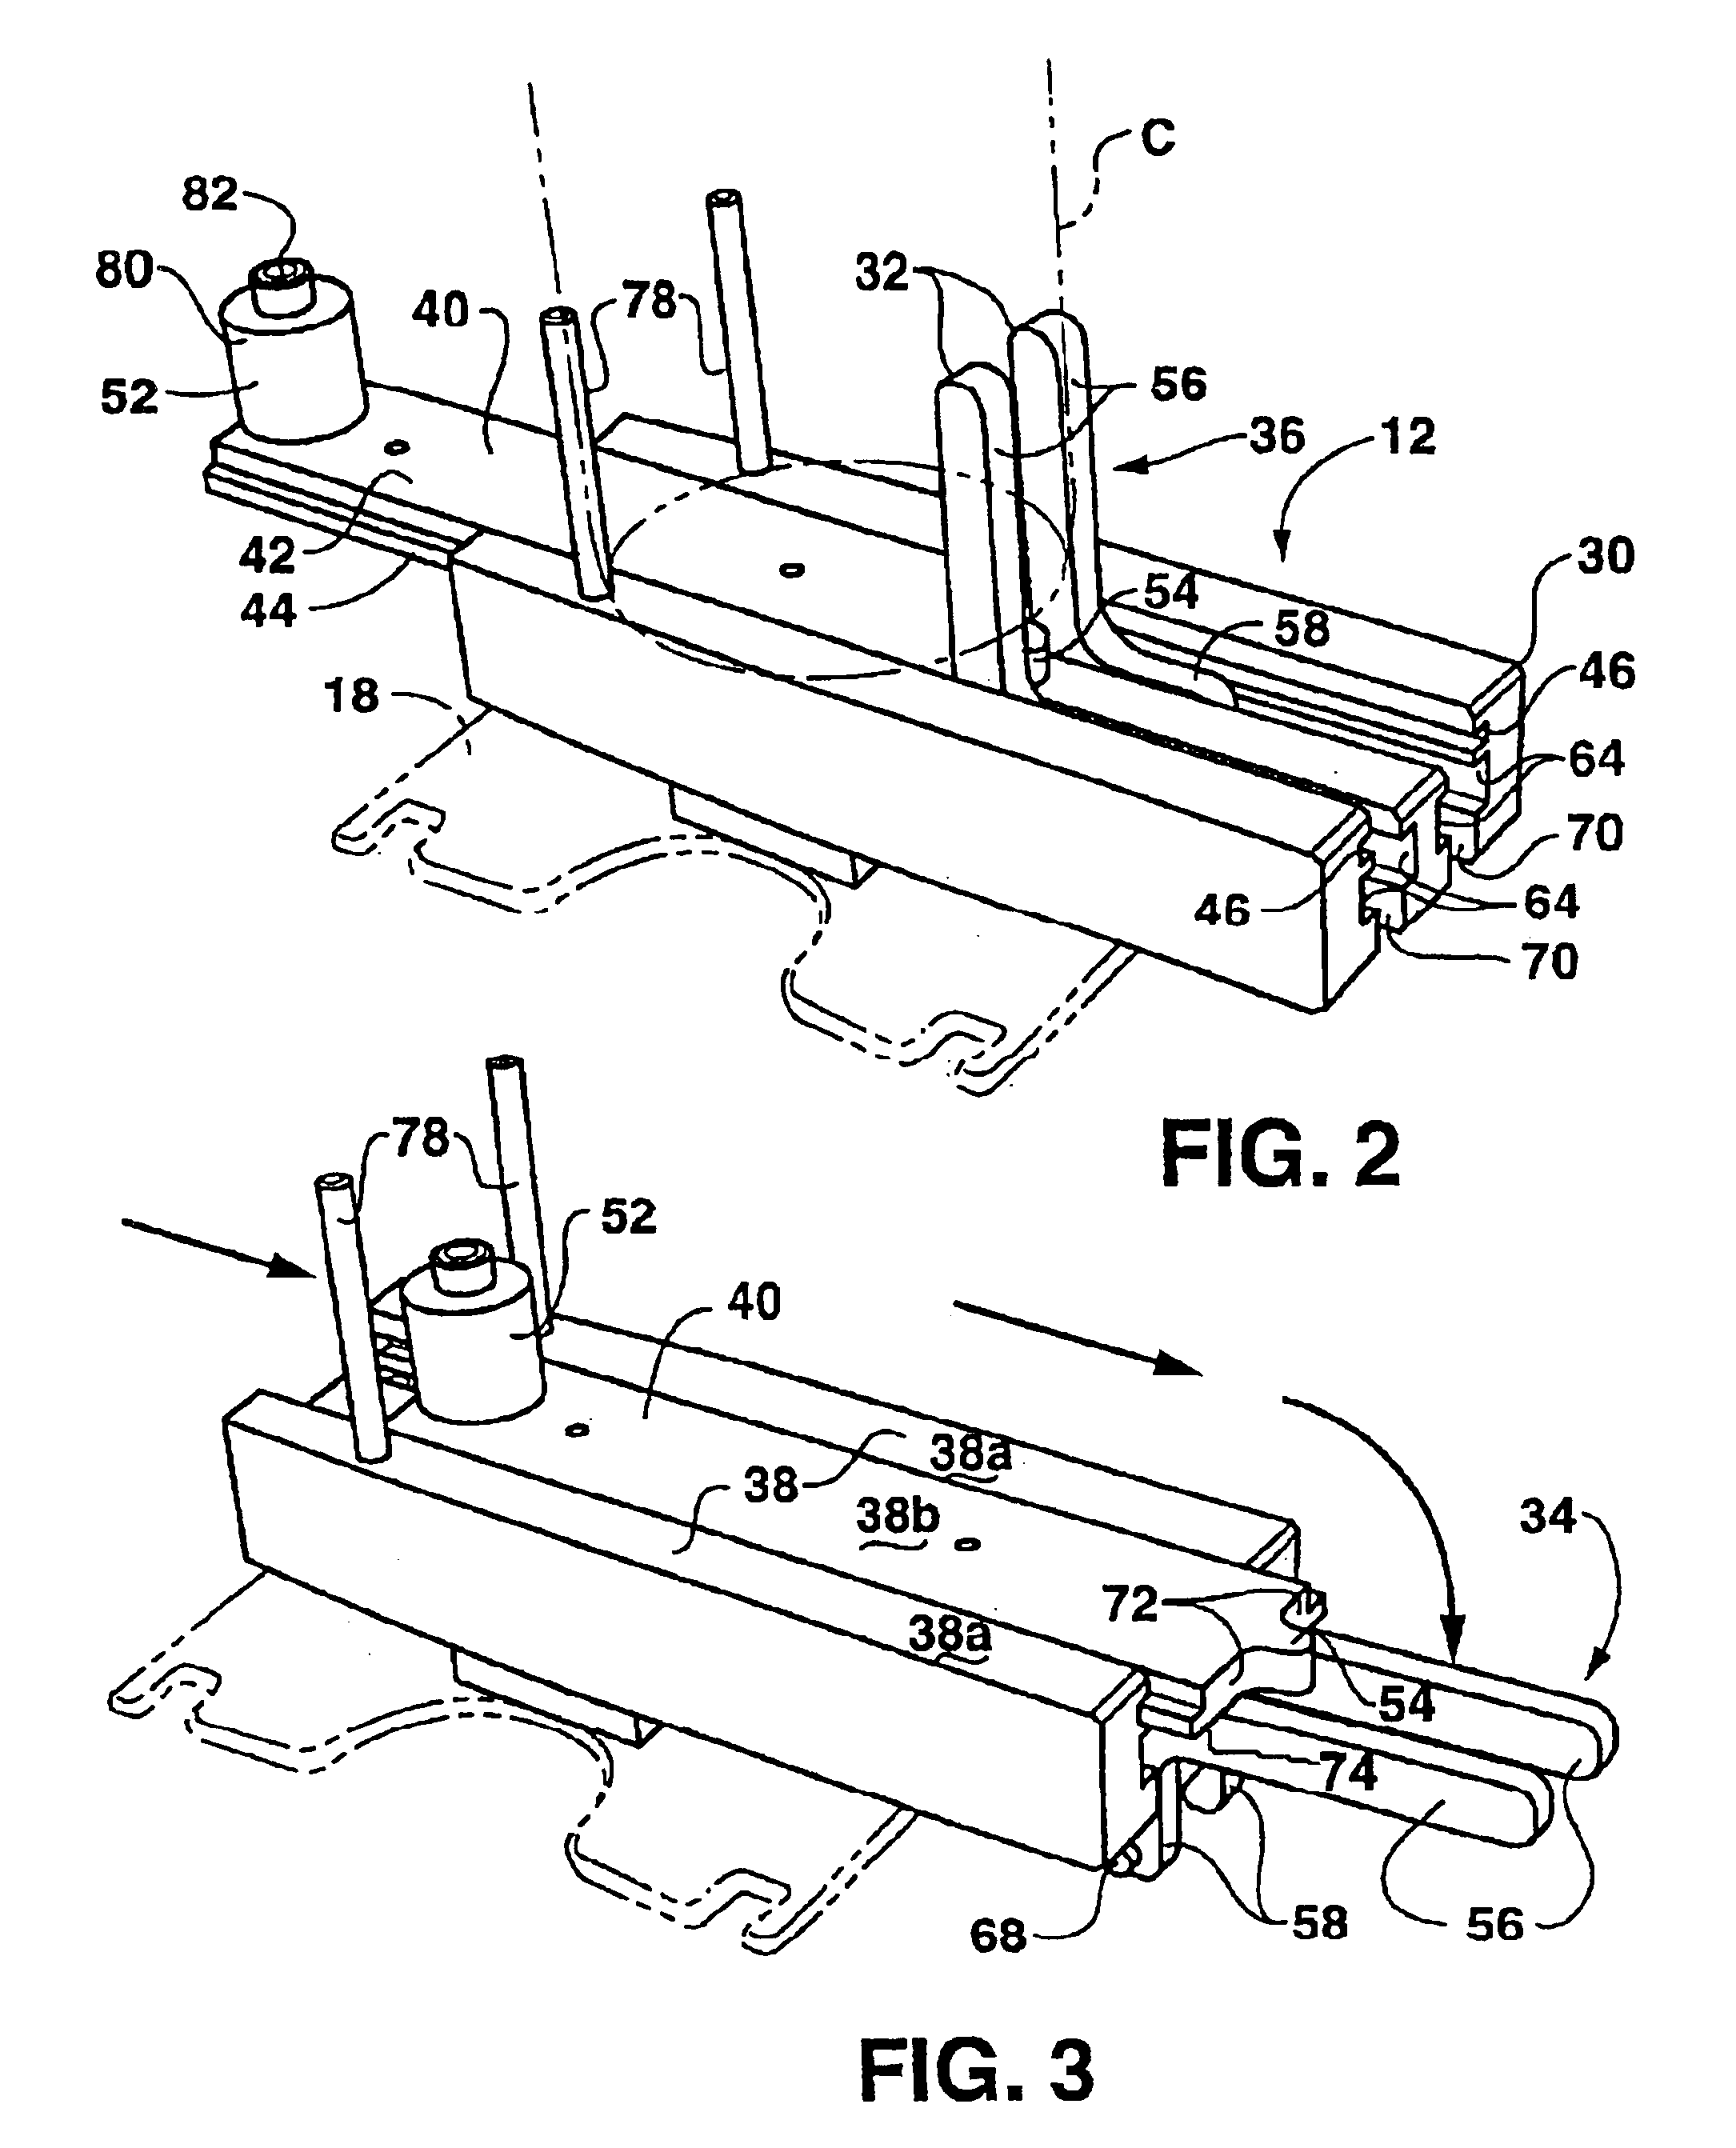 Gripper conveyor with clear conveying path and related conveyor link